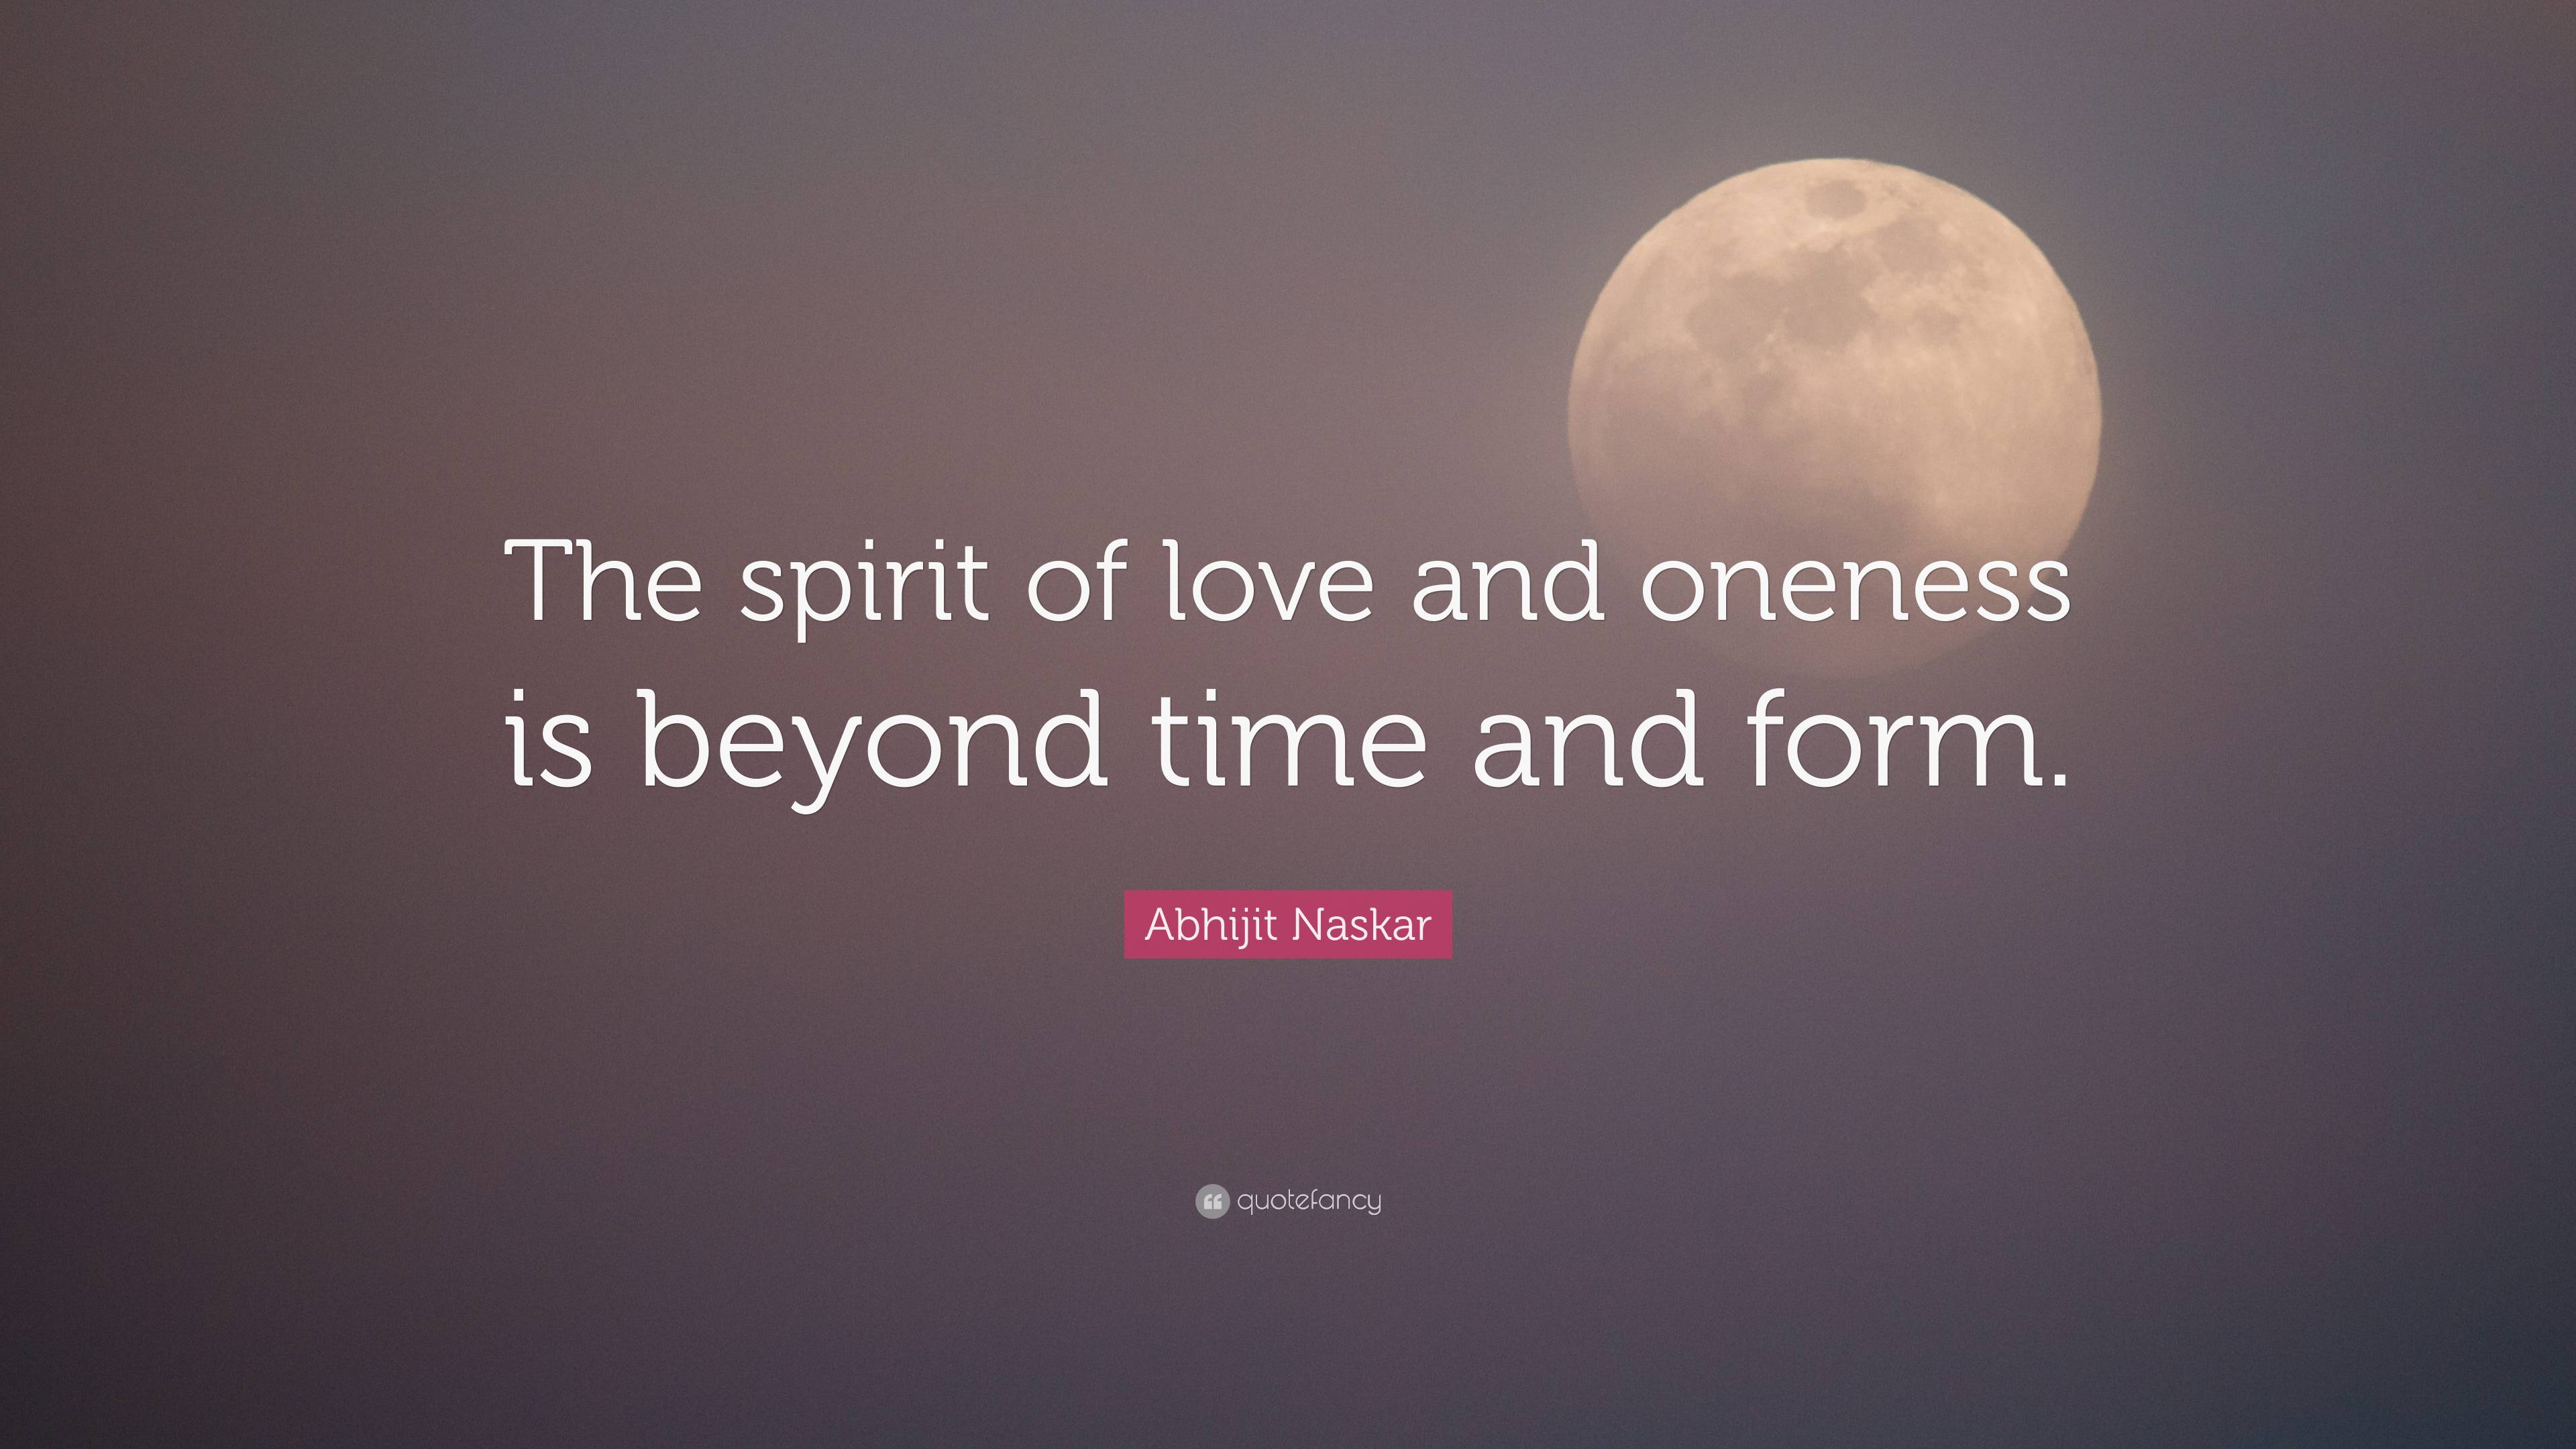 Abhijit Naskar Quote: “The spirit of love and oneness is beyond time ...